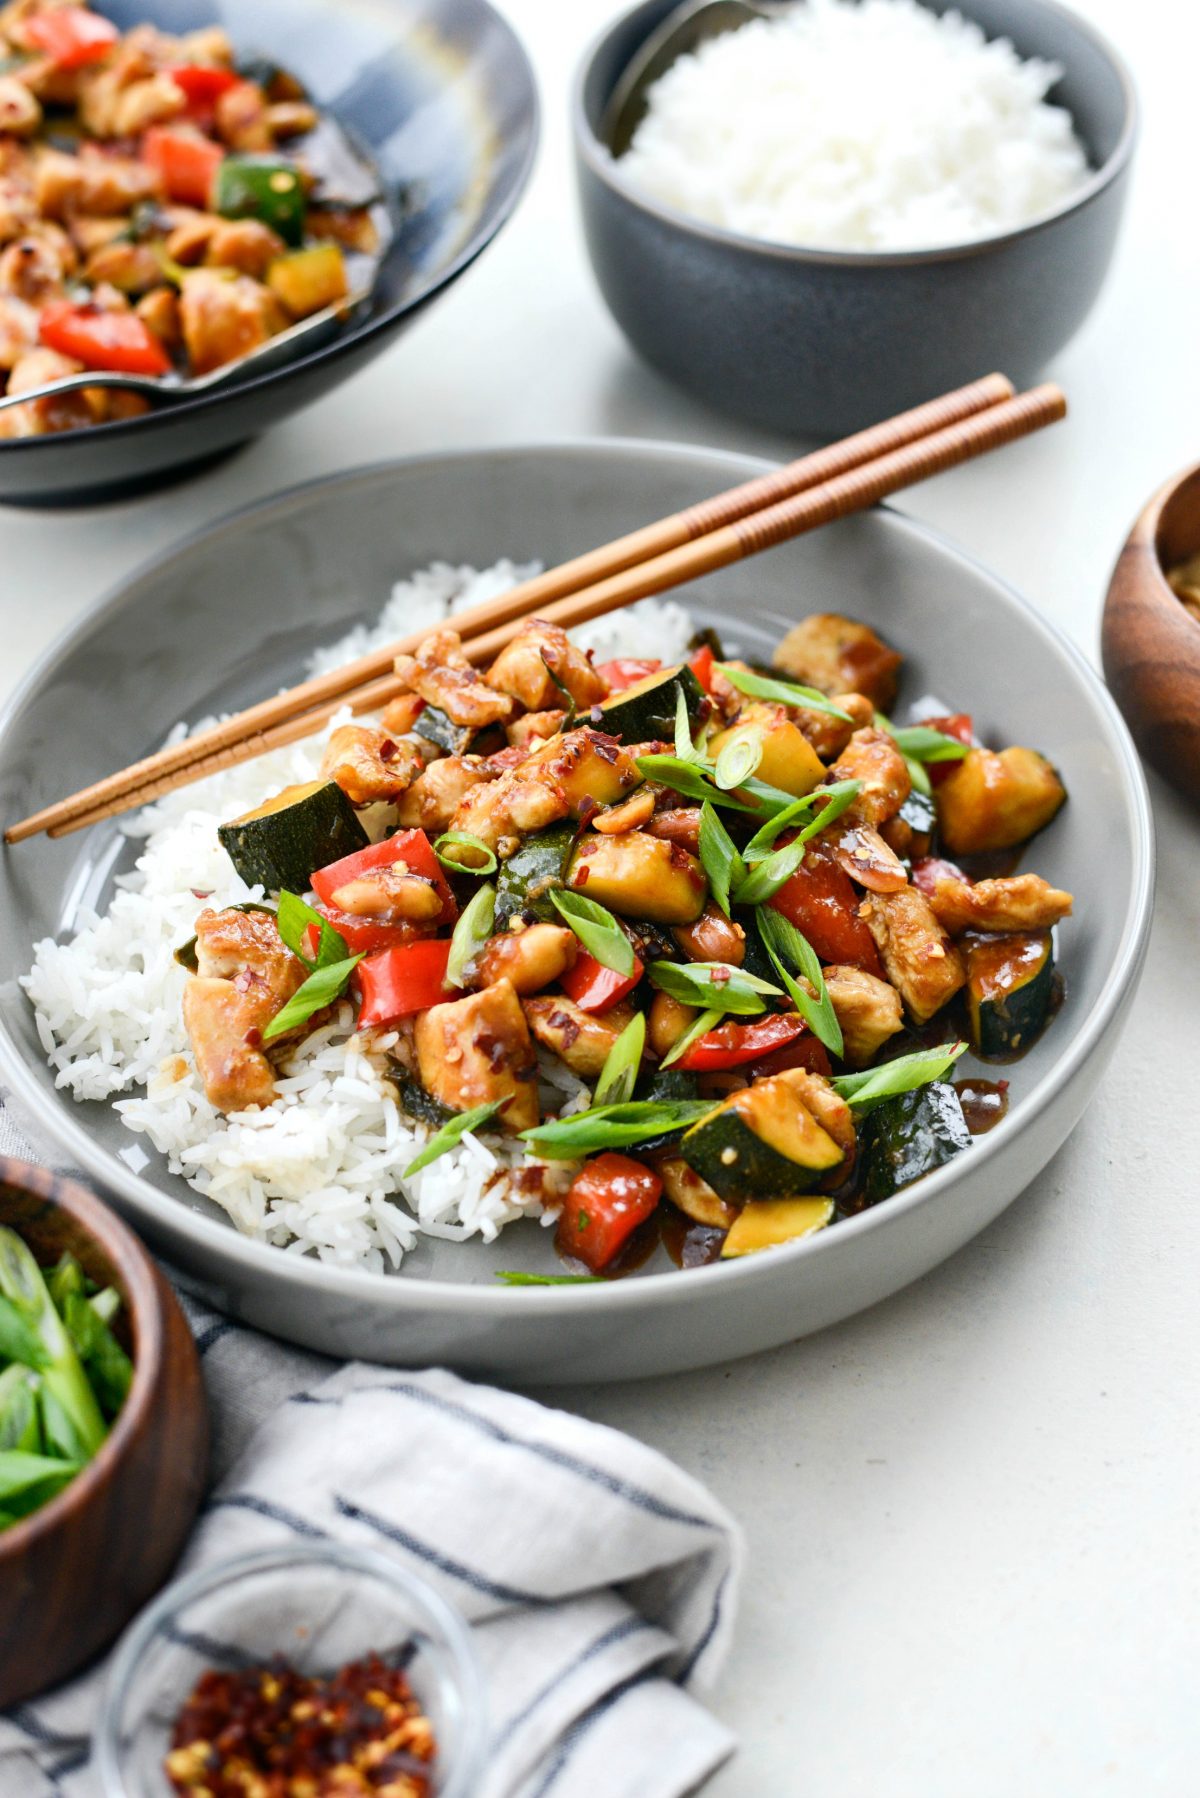 Kung Pao Chicken Stir-fry in grey bowl with rice, green onions and chopsticks.